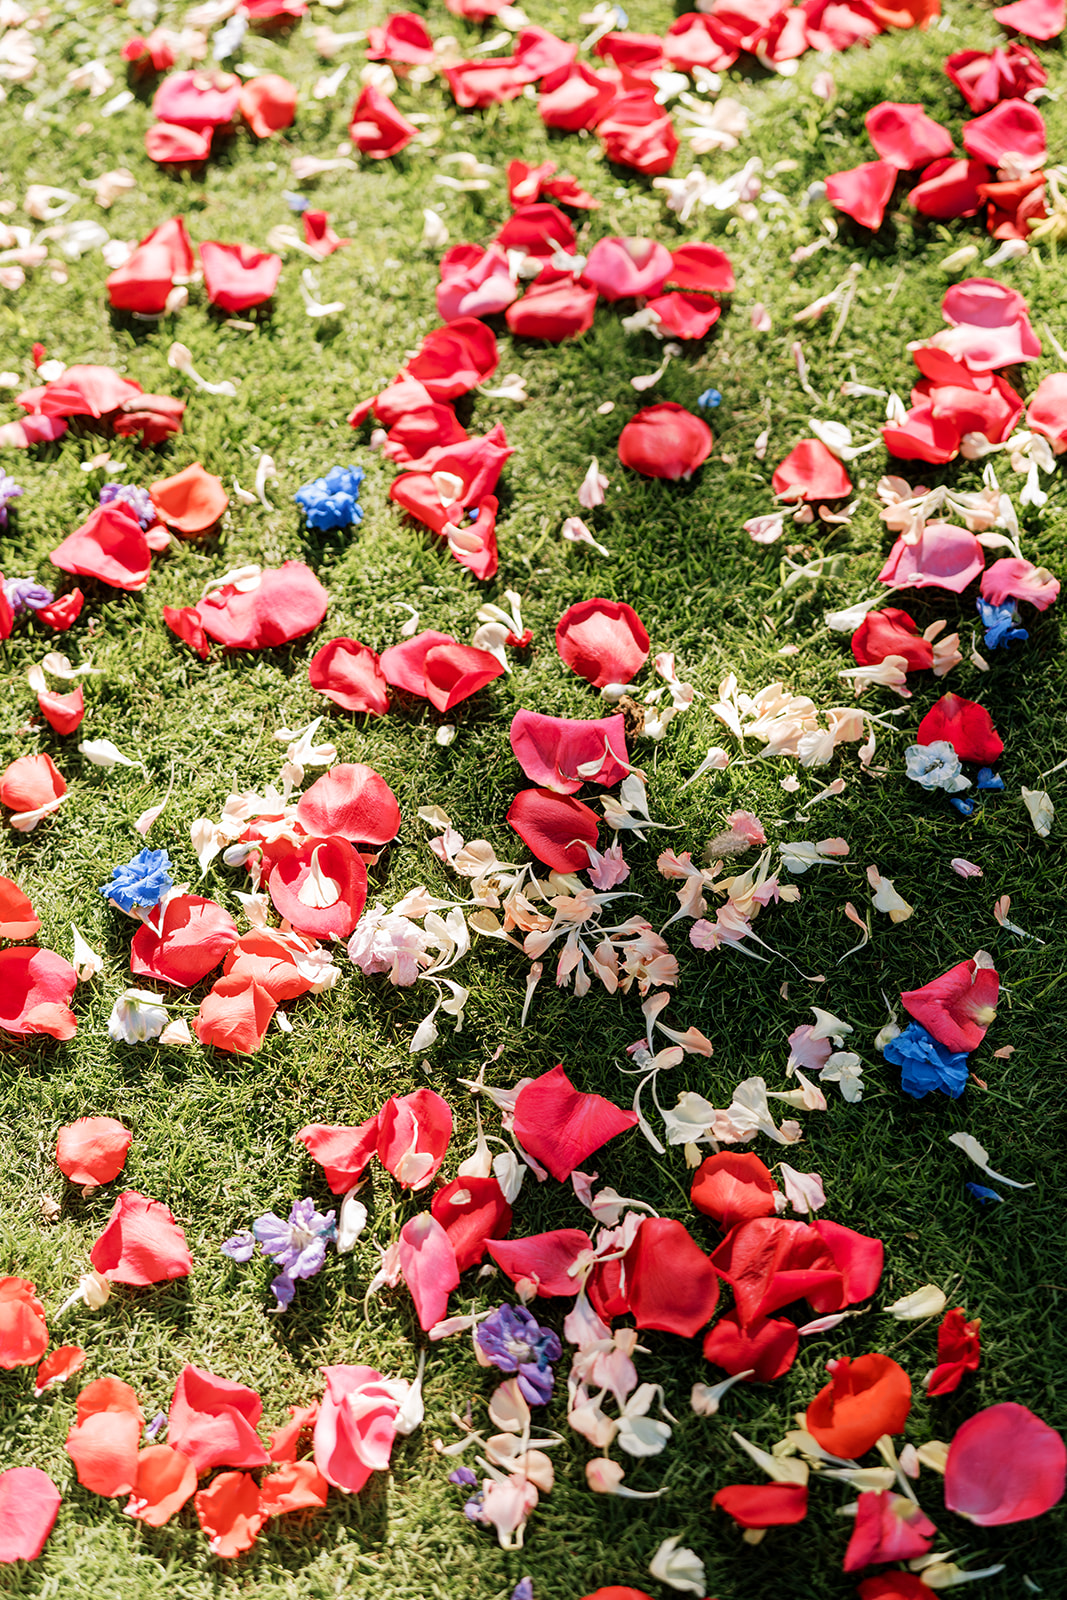 Scattered rose petals and small flowers on a grassy surface Hawaiian Wedding in Kauai